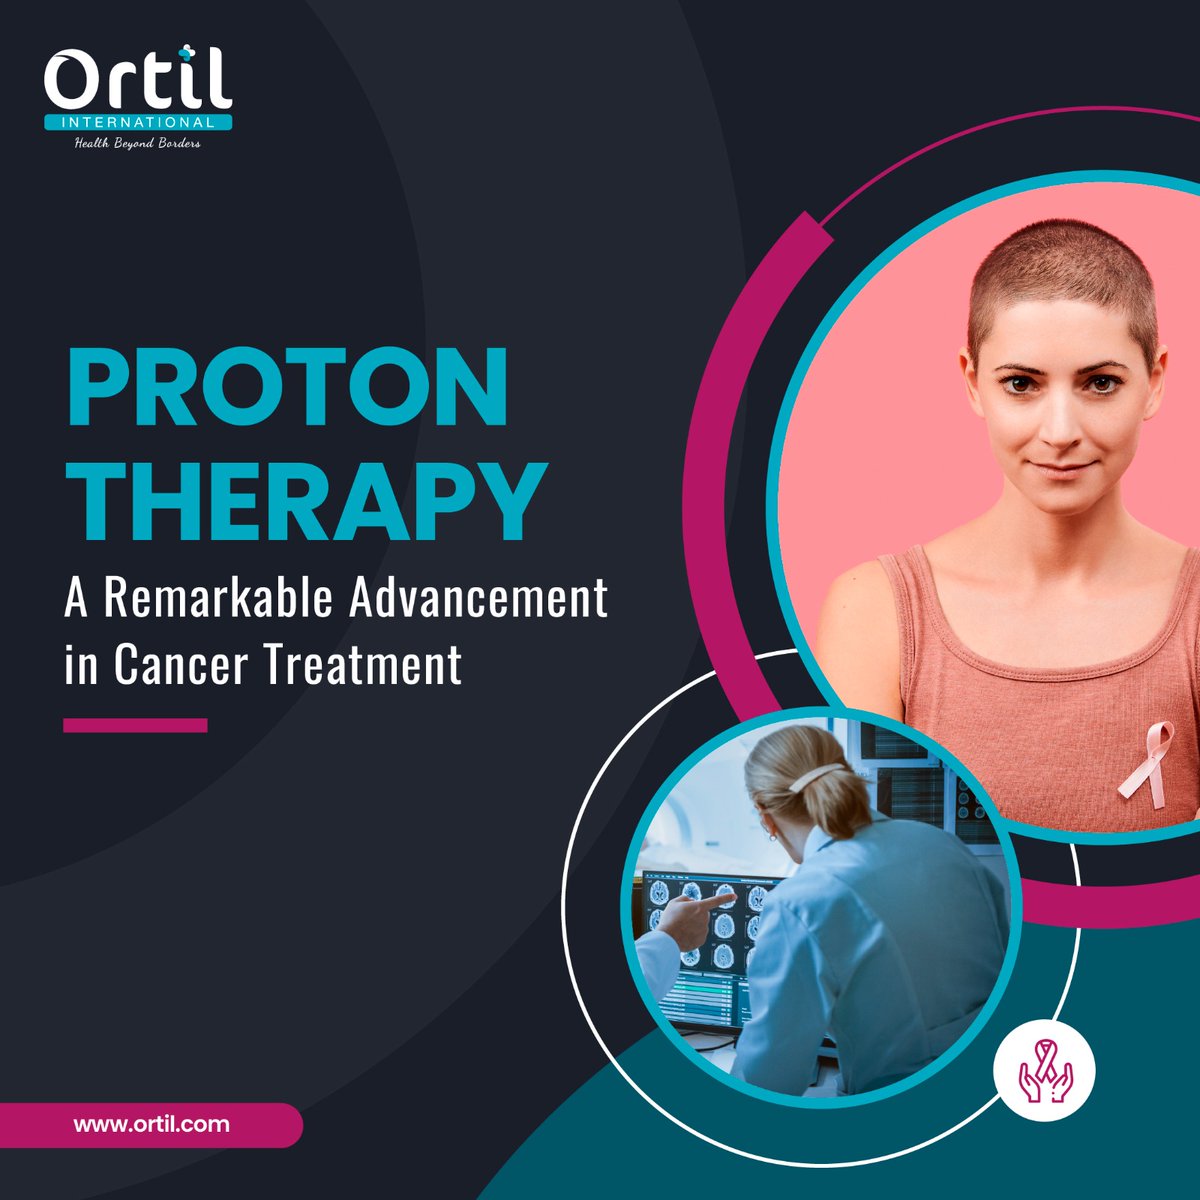 Contact us today to learn more about Proton Therapy 
#ProtonTherapy #PrecisionCancerTreatment #AdvancedCancerTreatment #CancerFighter #ProstateCancerTreatment #SupportForCancerPatients #cancertreatment #cancercare #advancedcancertherapy #headandneckcancers #prostatecancer